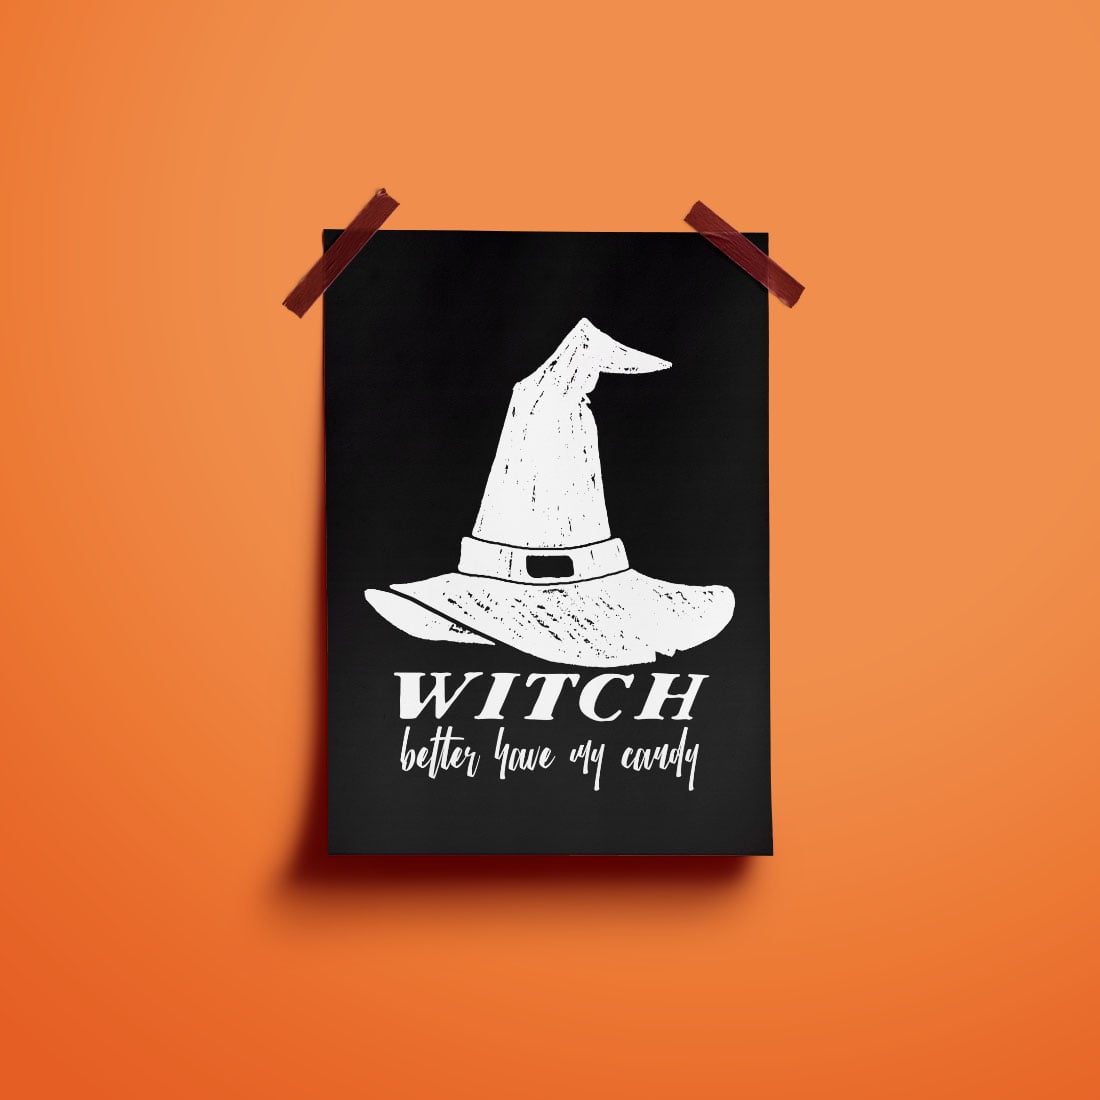 Witch Better Have My Candy Free Halloween Printable • Little Gold Pixel • In which I share a Witch Better Have My Candy free Halloween printable to hang on your door or holiday party. Download, print and hang up today! #halloween #printable #freebie #witch